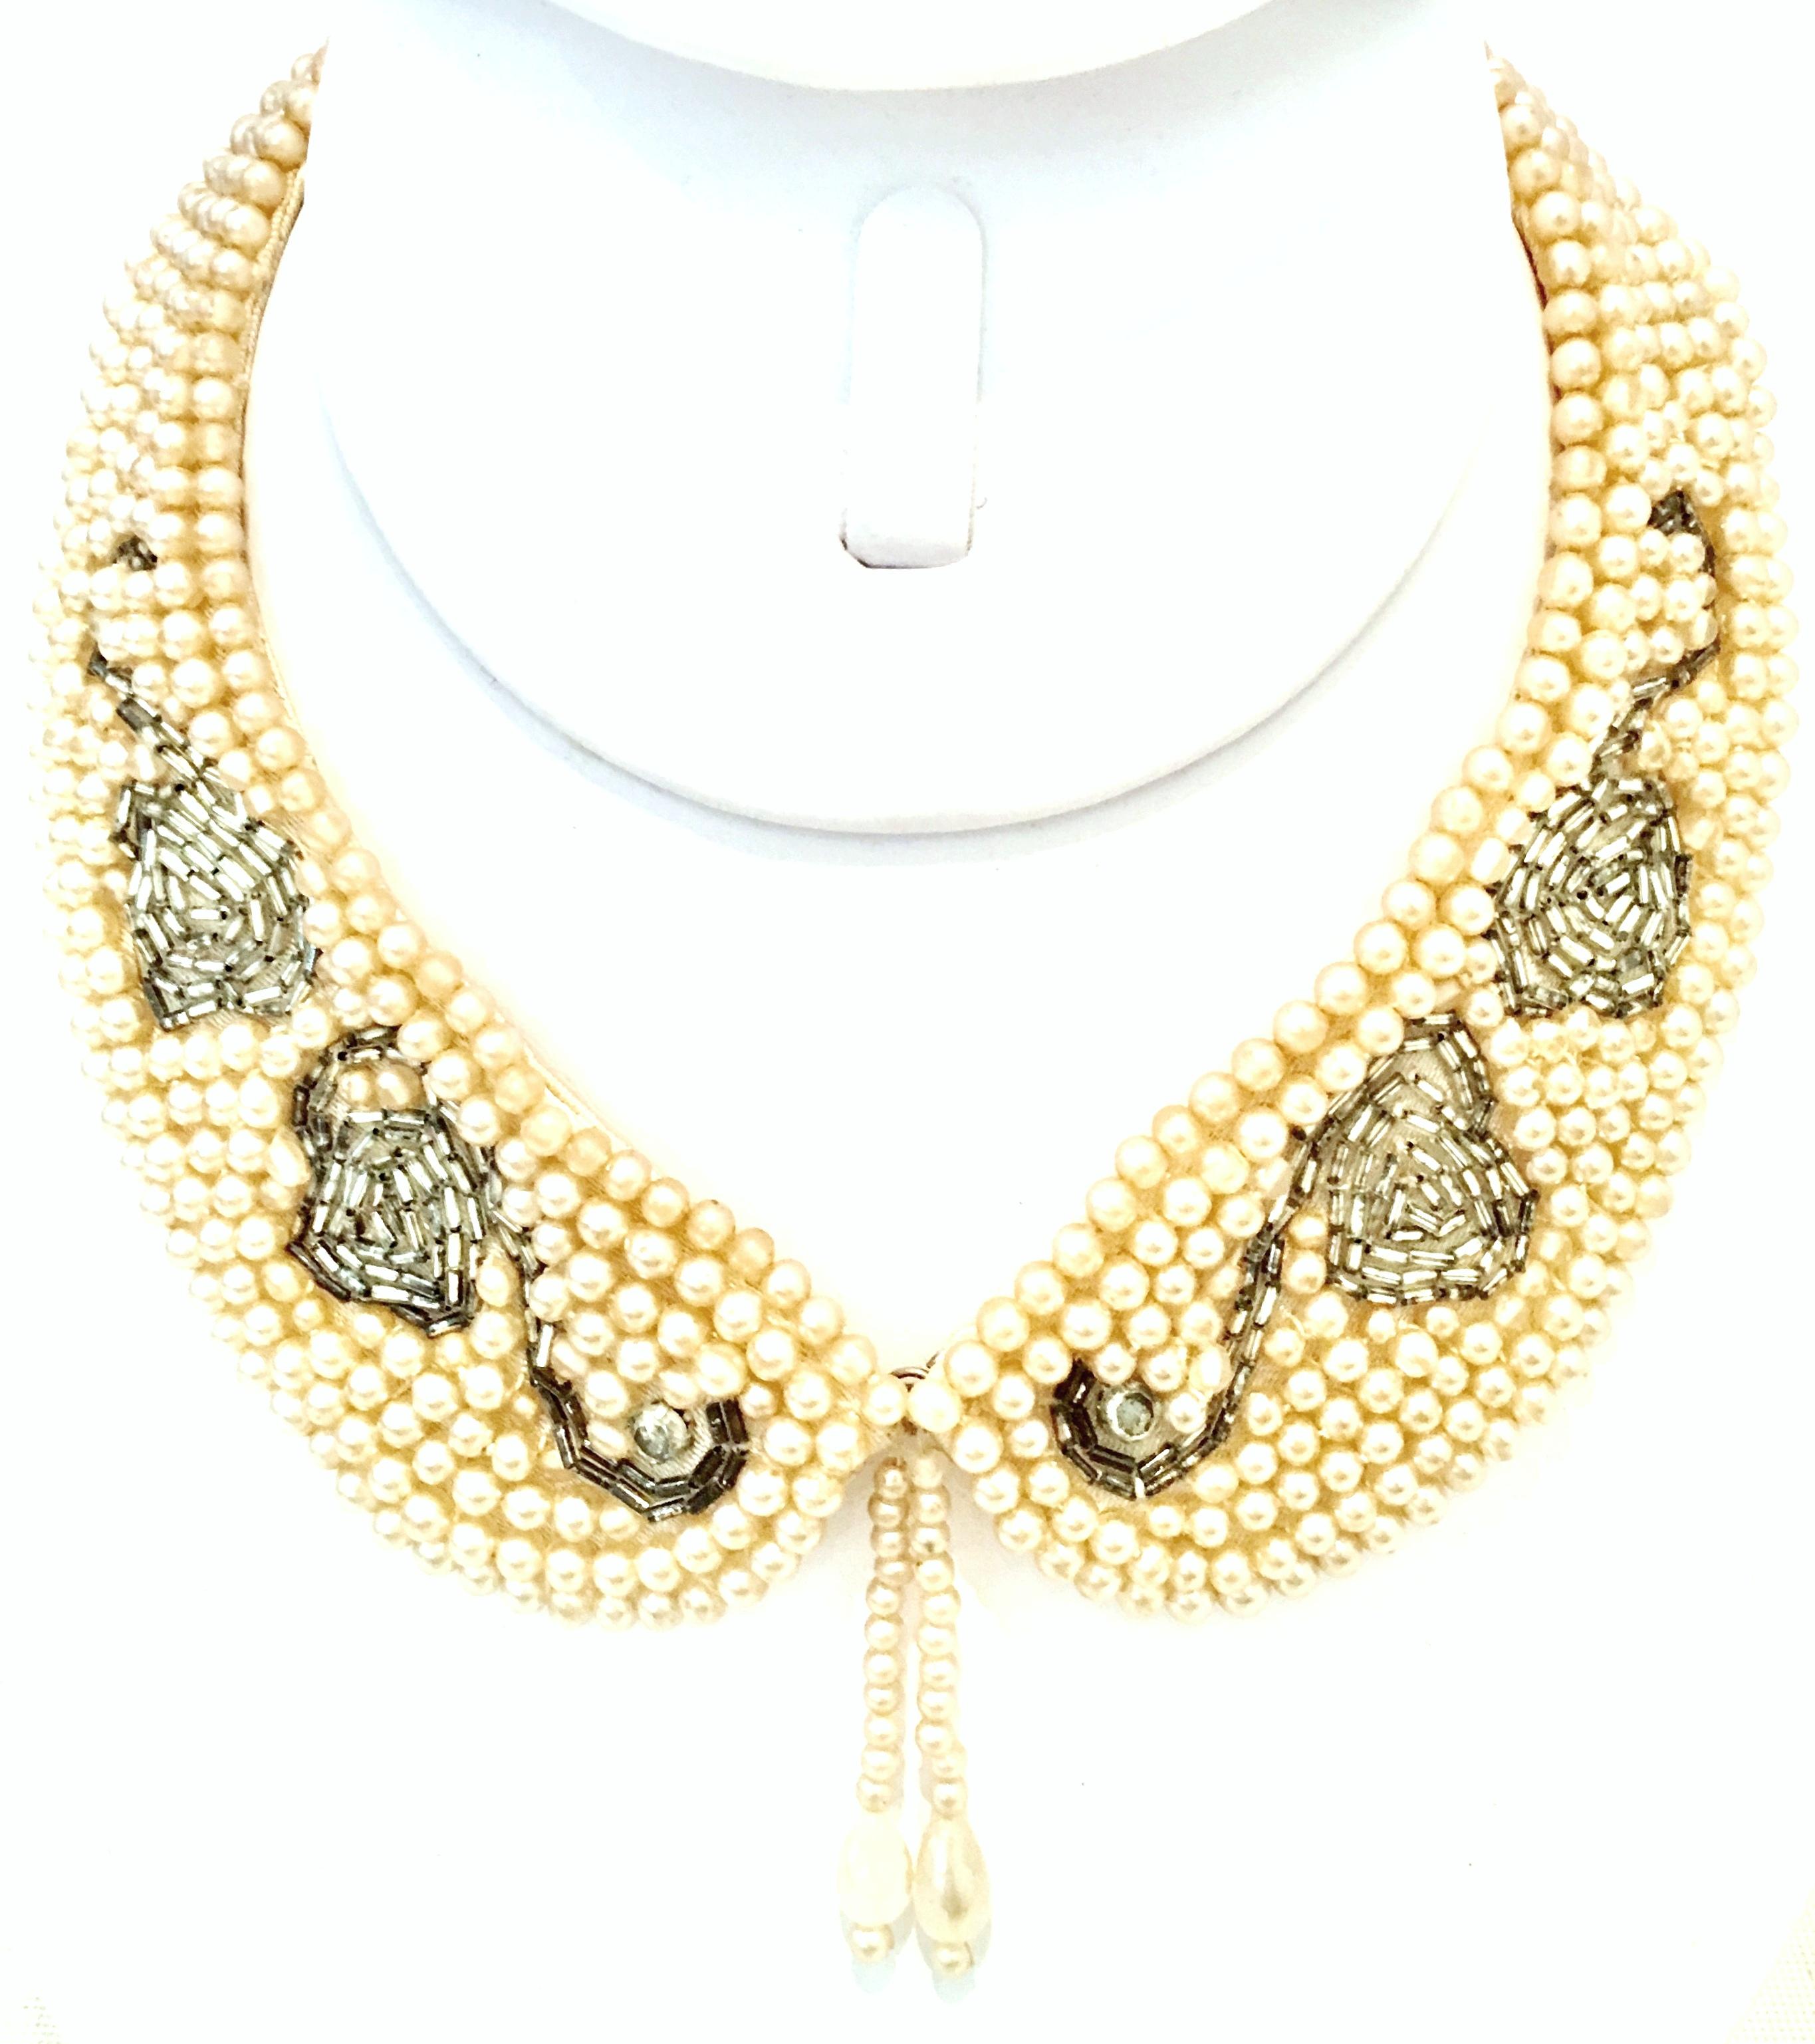 Mid- 20th Century Japanese Faux Pearl & Crystal Rhinestone choker style Peter Pan Swan collar necklace. This stylish, timeless and classic collar necklace features a gunsmoke color Austrian crystal bead abstract swan motif. with a faux pearl bead